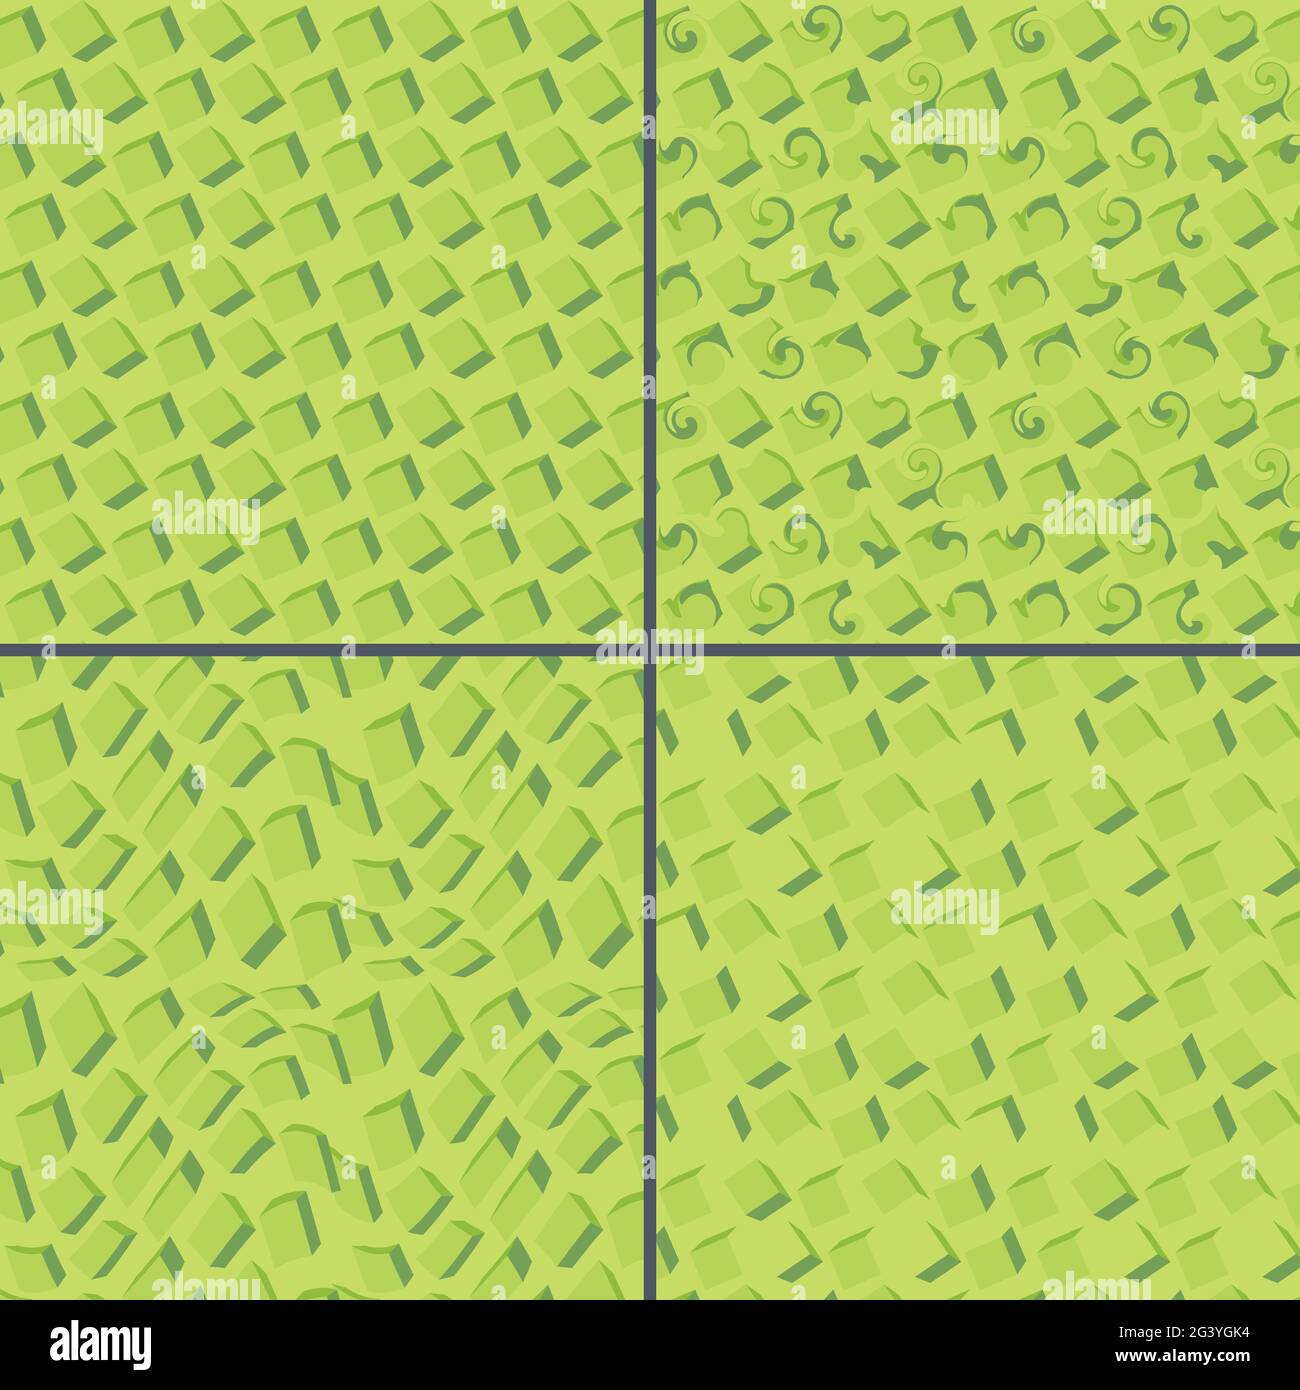 Seamless Abstract Simple Pattern. Scalable 3D Style Geometric Pattern. Set of 4 Different Patterns made from Cubes of Different Sizes. Neon Green Back Stock Vector